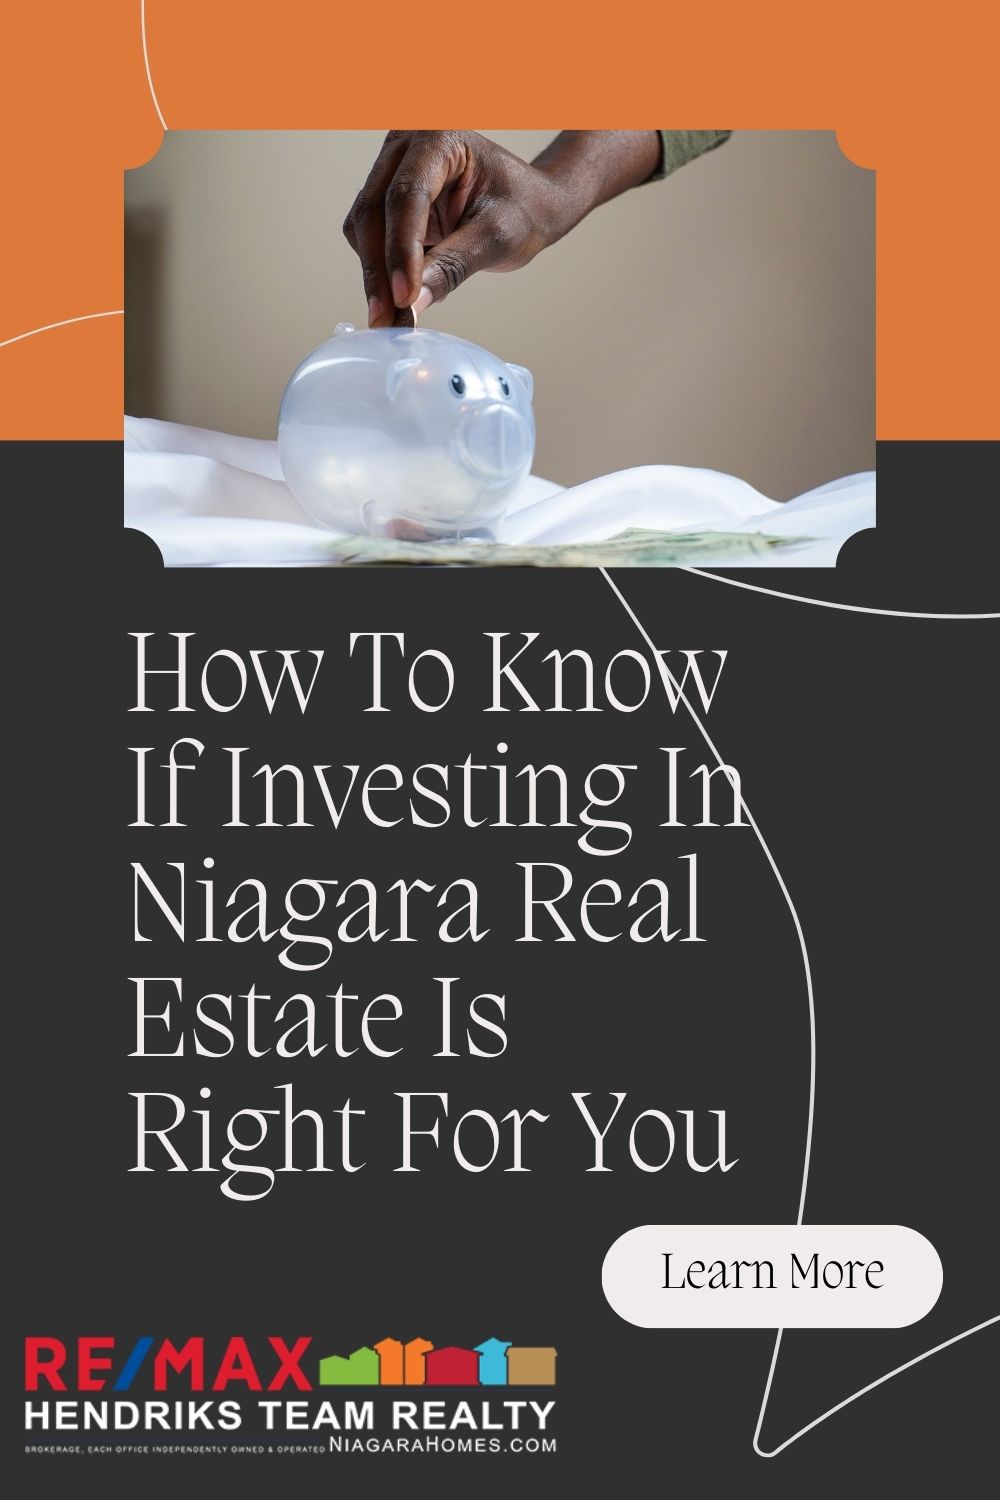 How To Know If Investing In Real Estate Is Right For You